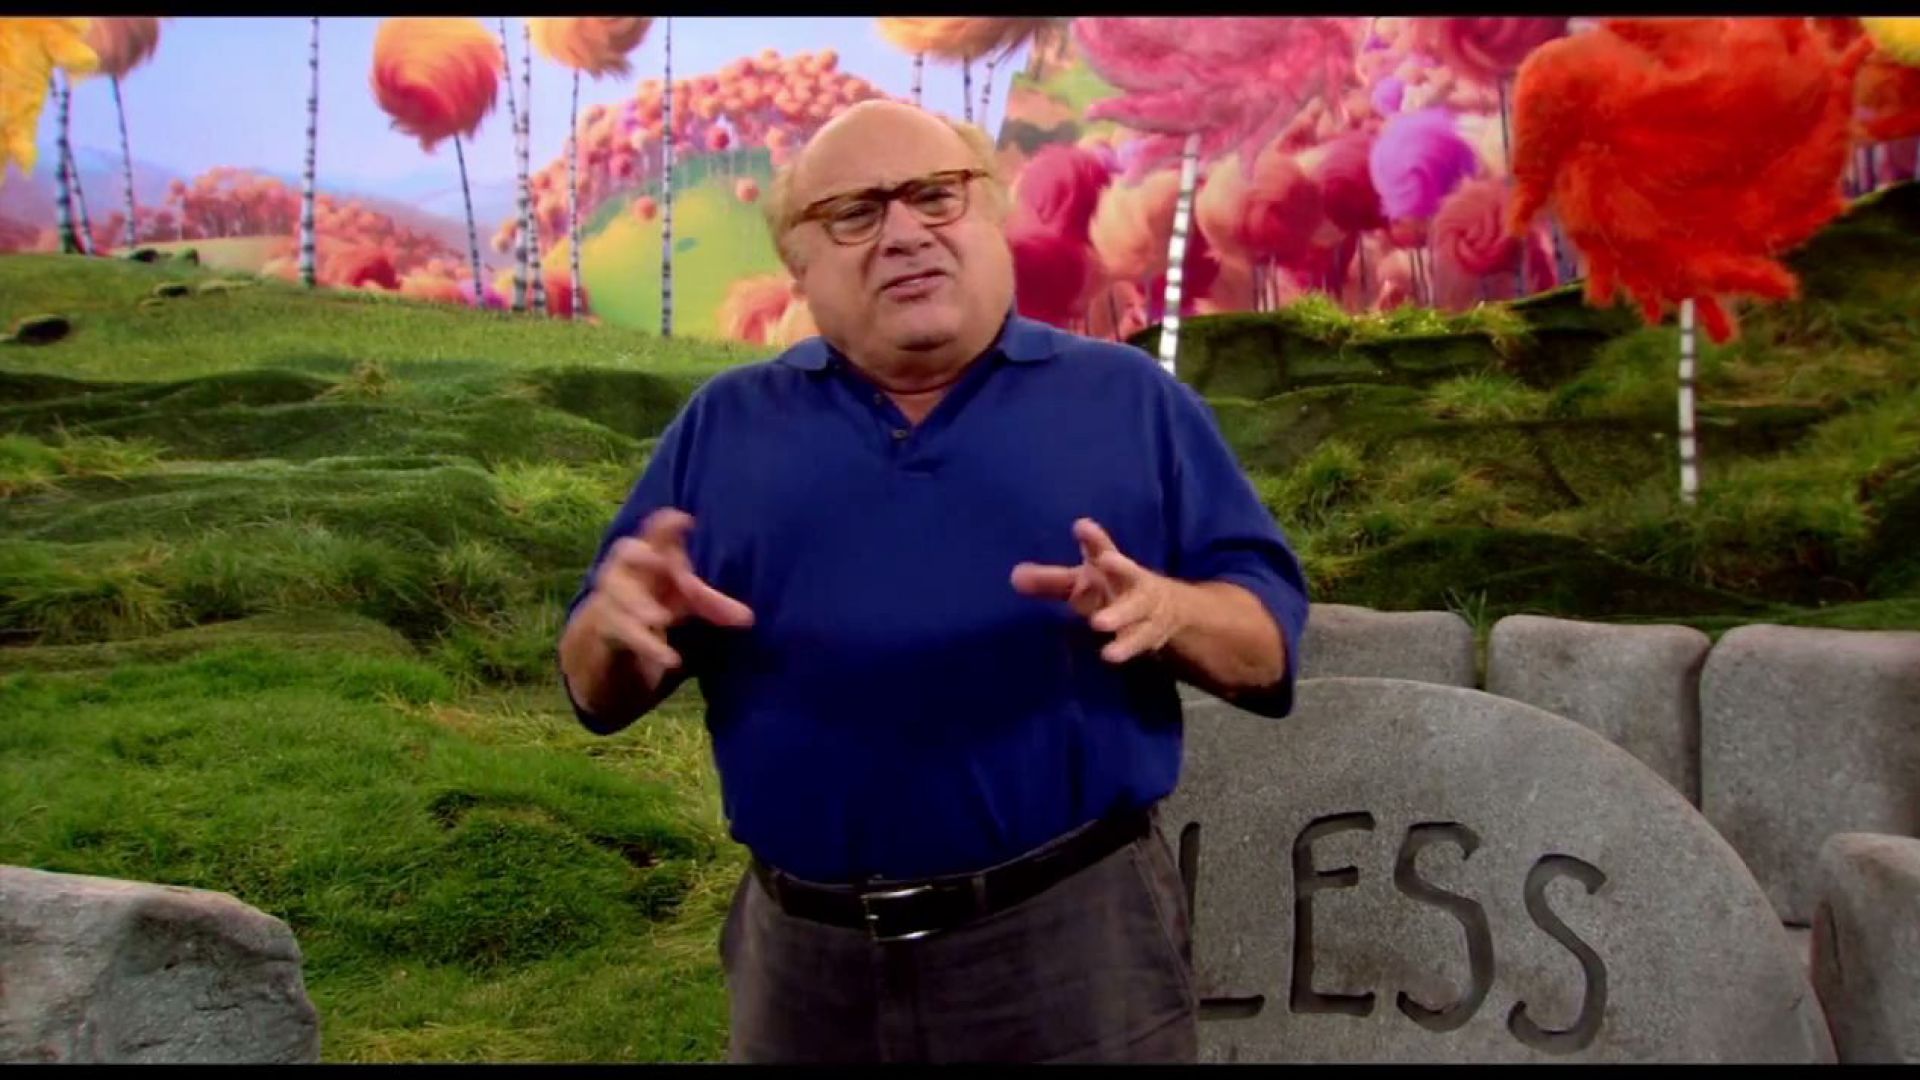 Danny DeVito is The Lorax in Italian, German and Russian